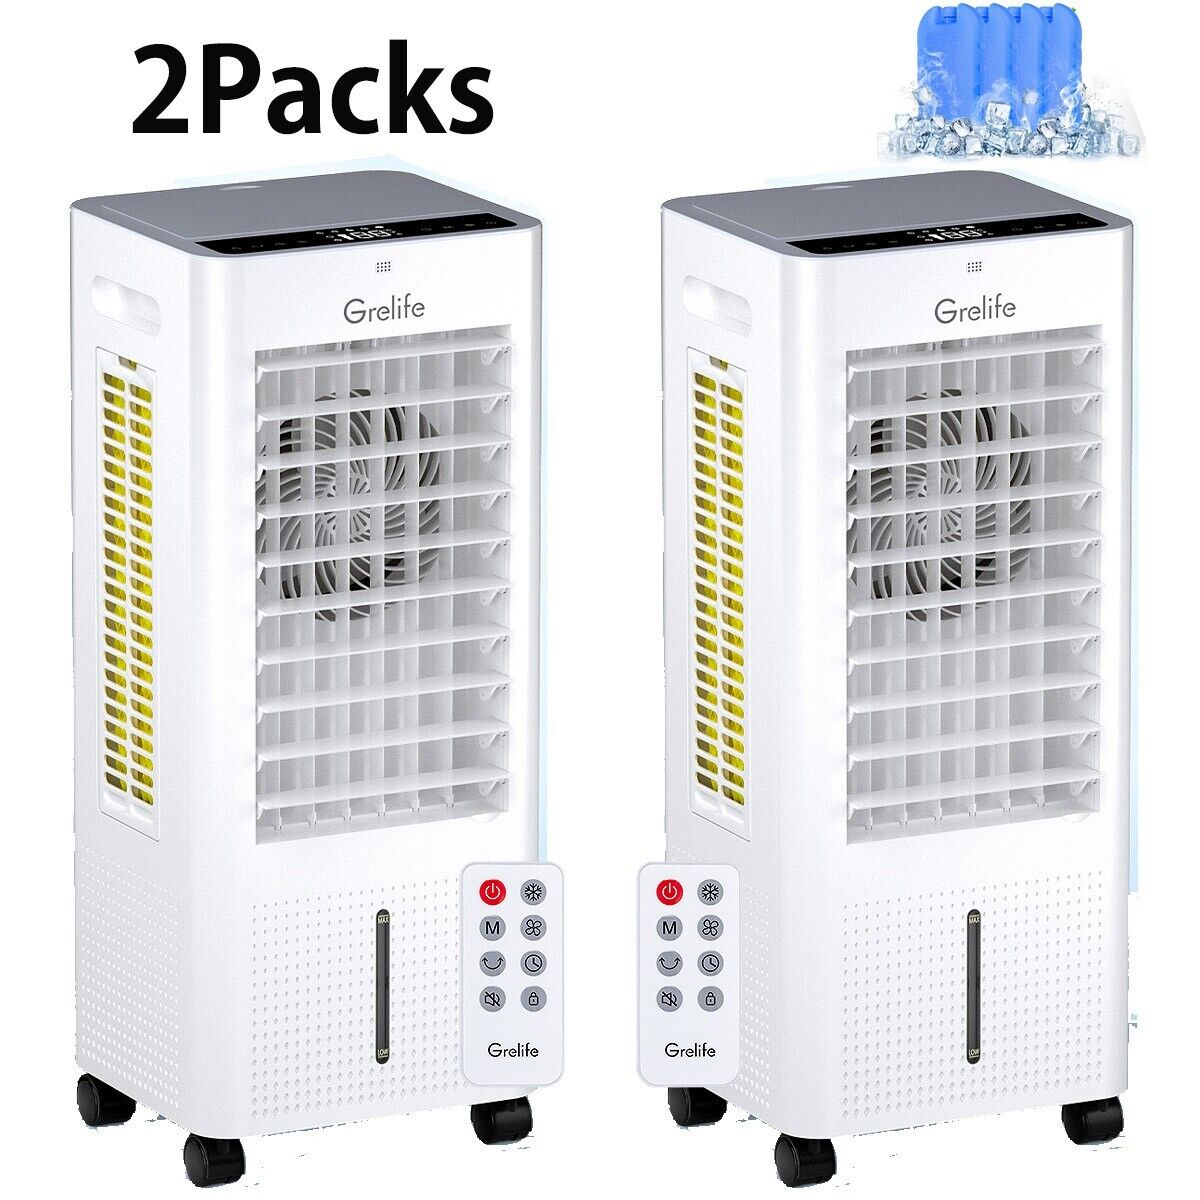 2x Portable Air Cooler Evaporative Tower Fan Ice Cooling Remote Living Room